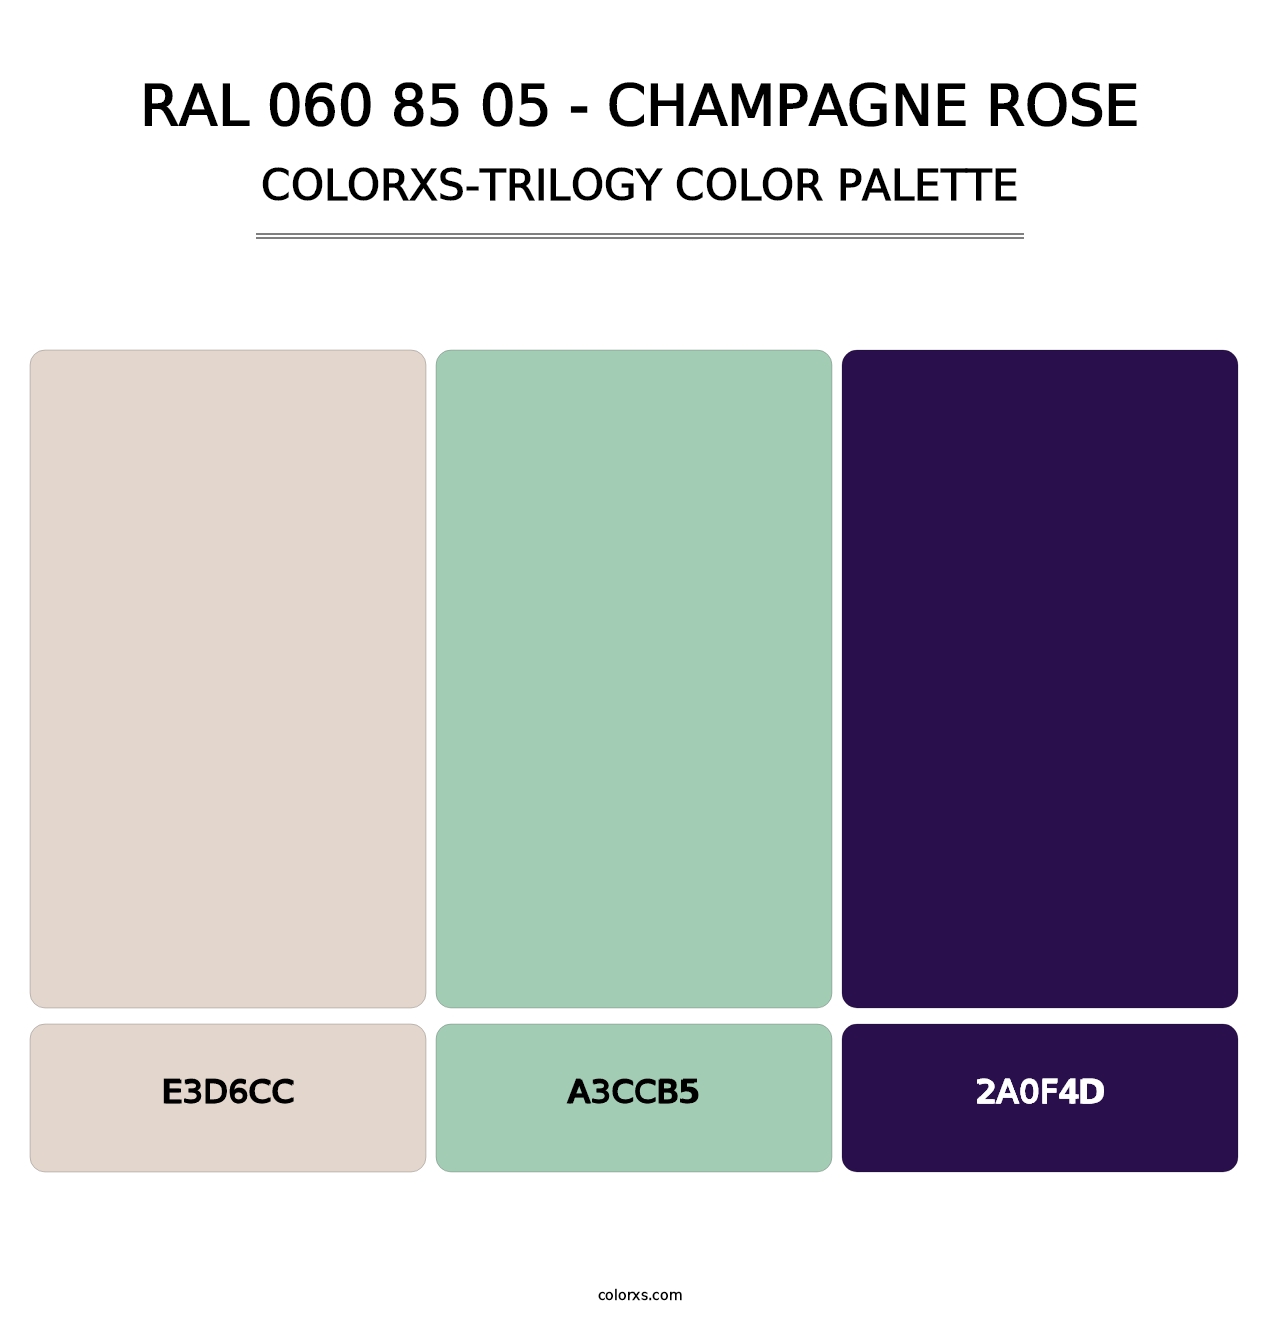 RAL 060 85 05 - Champagne Rose - Colorxs Trilogy Palette